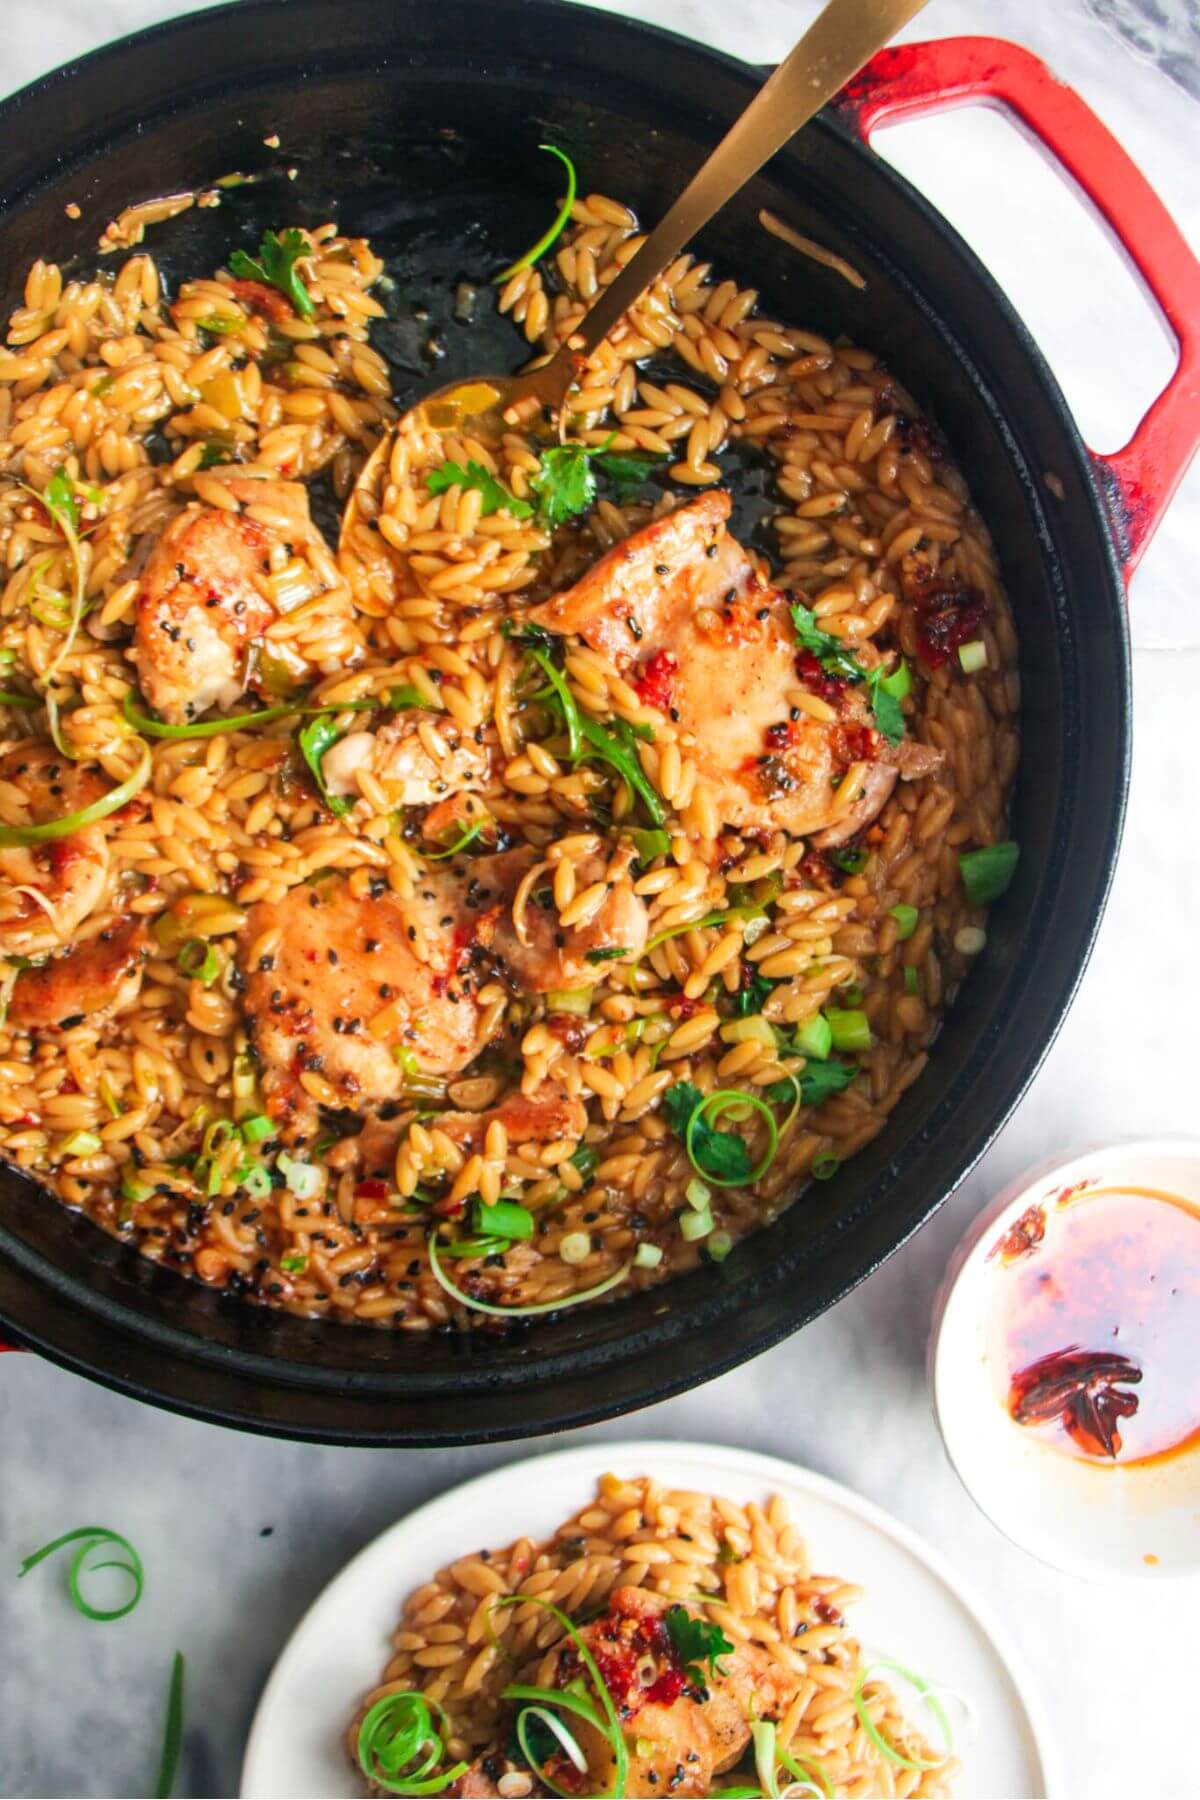 Ginger chicken orzo in a large black skillet, with more chicken orzo in a small plate on the side.